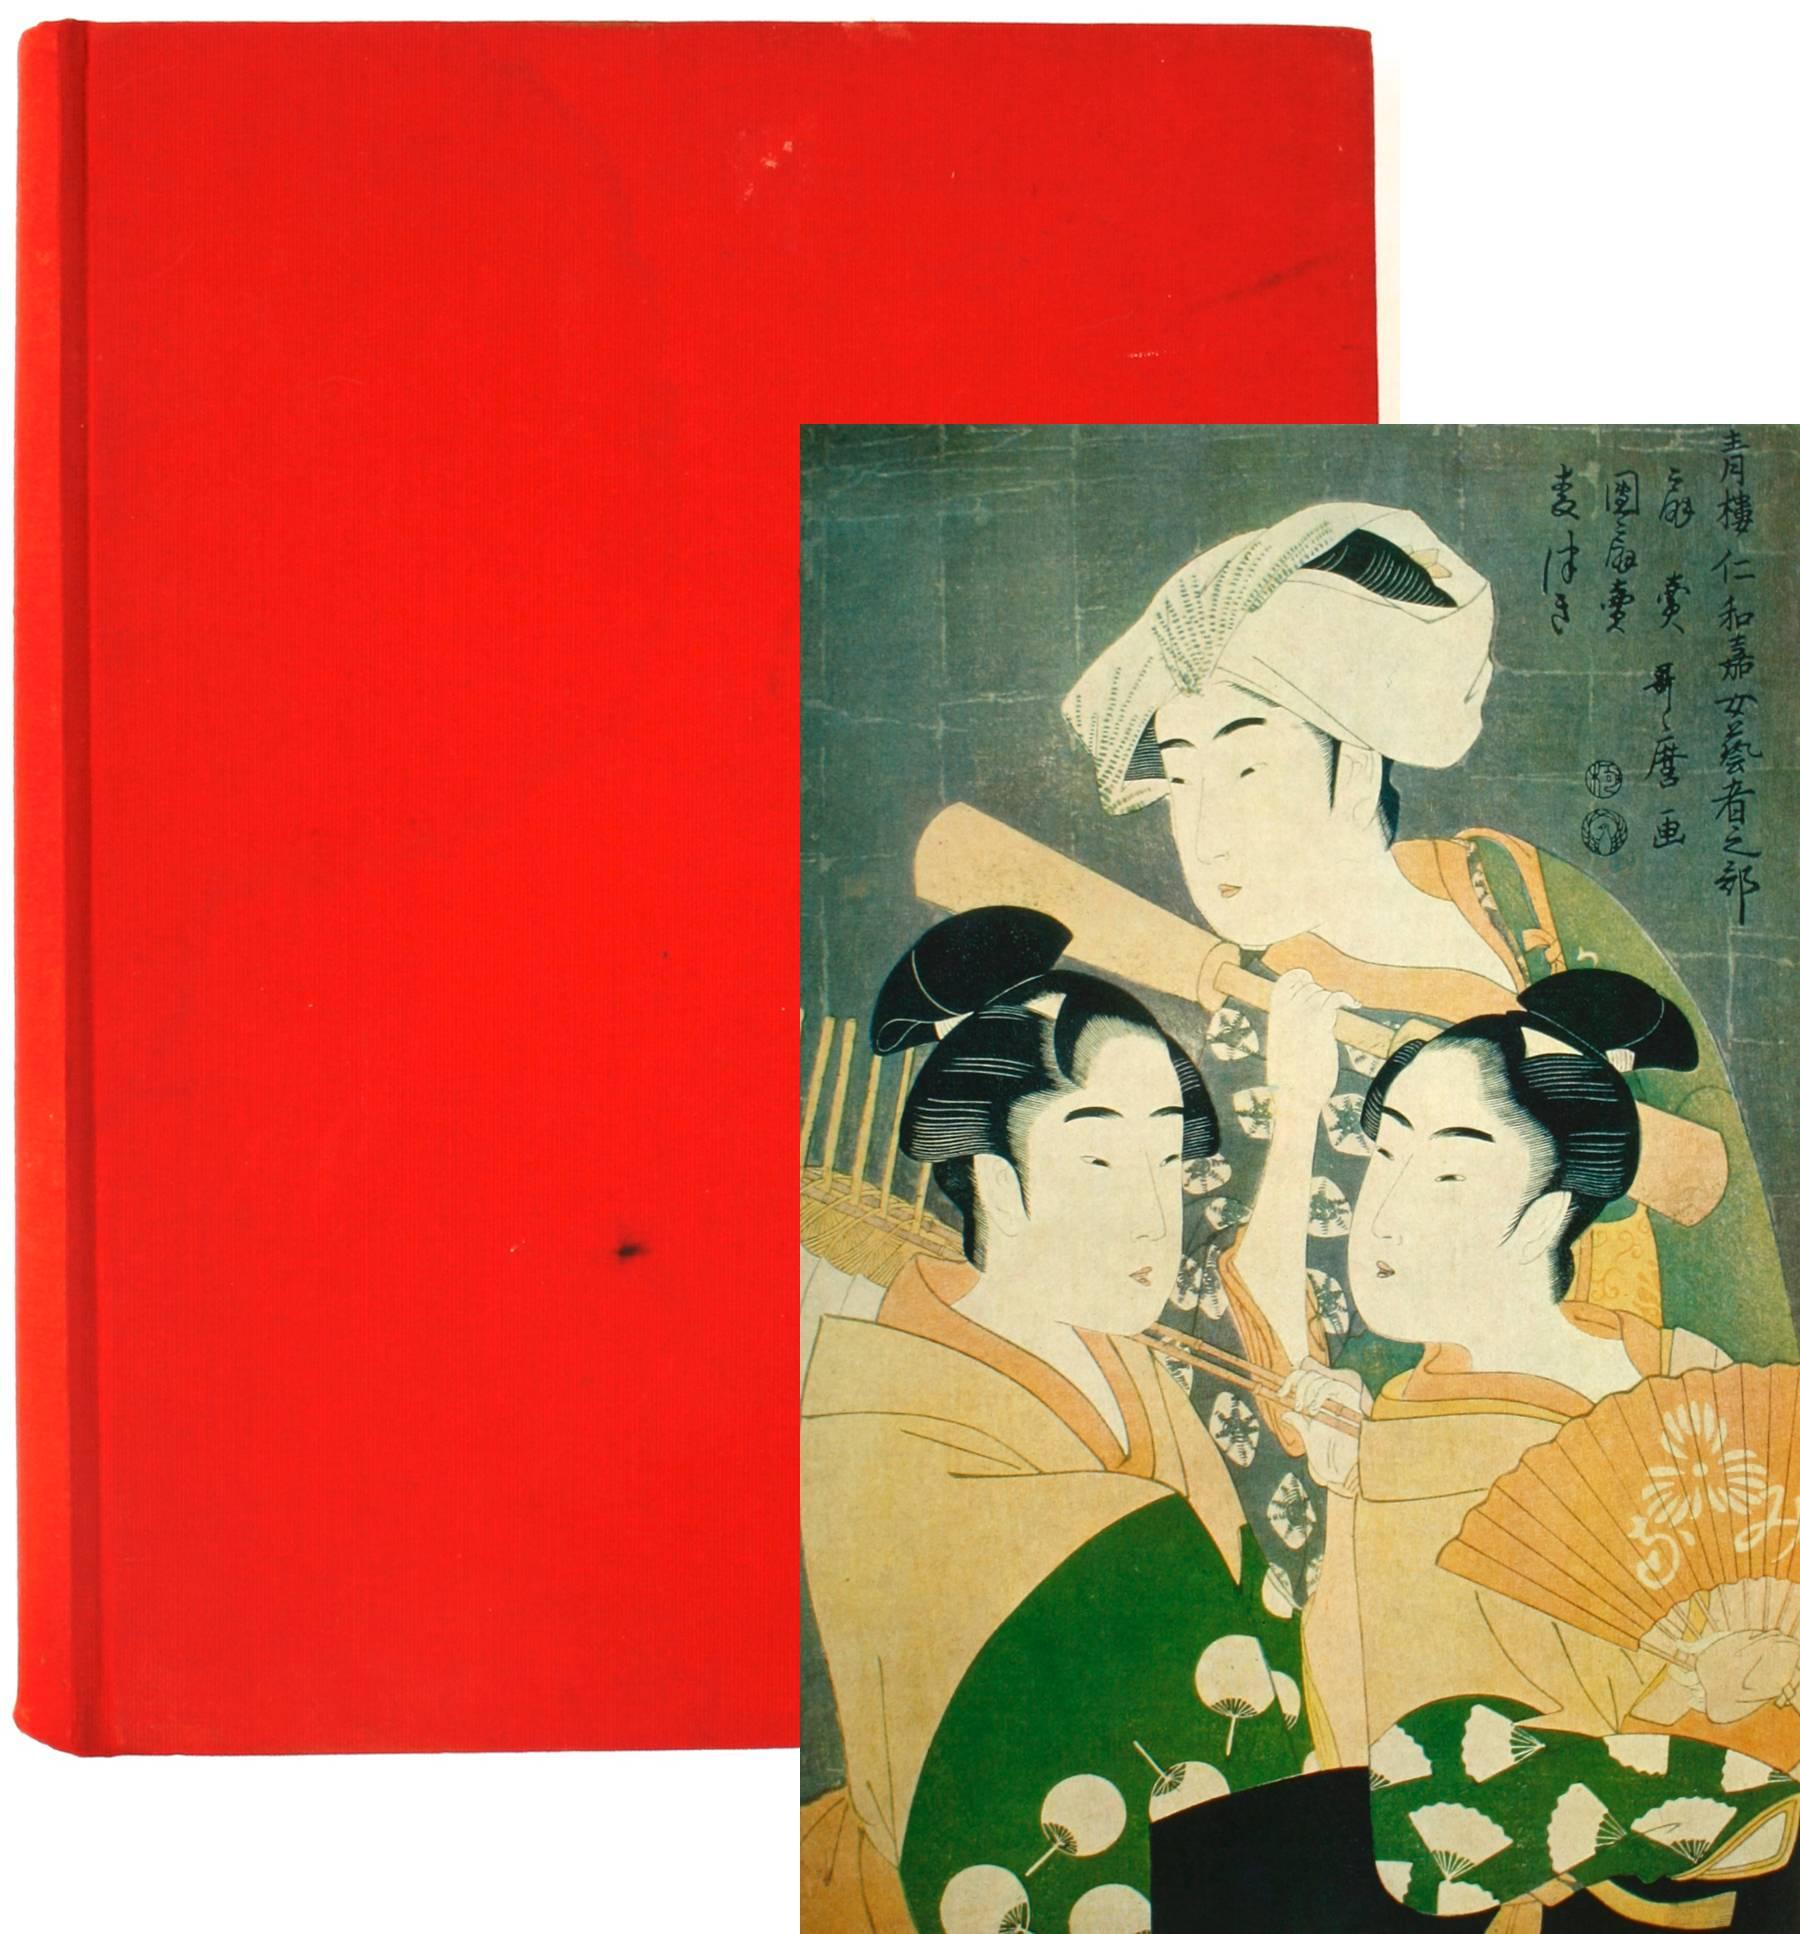 The Traditional Arts of Japan by H. Boger. Garden City: Doubleday and Co., 1964. First edititon hardcover lacking slipcase. With 369 black and white photographs, 26 color reproductions and 40 line drawings showing illustrating the steps Japanese